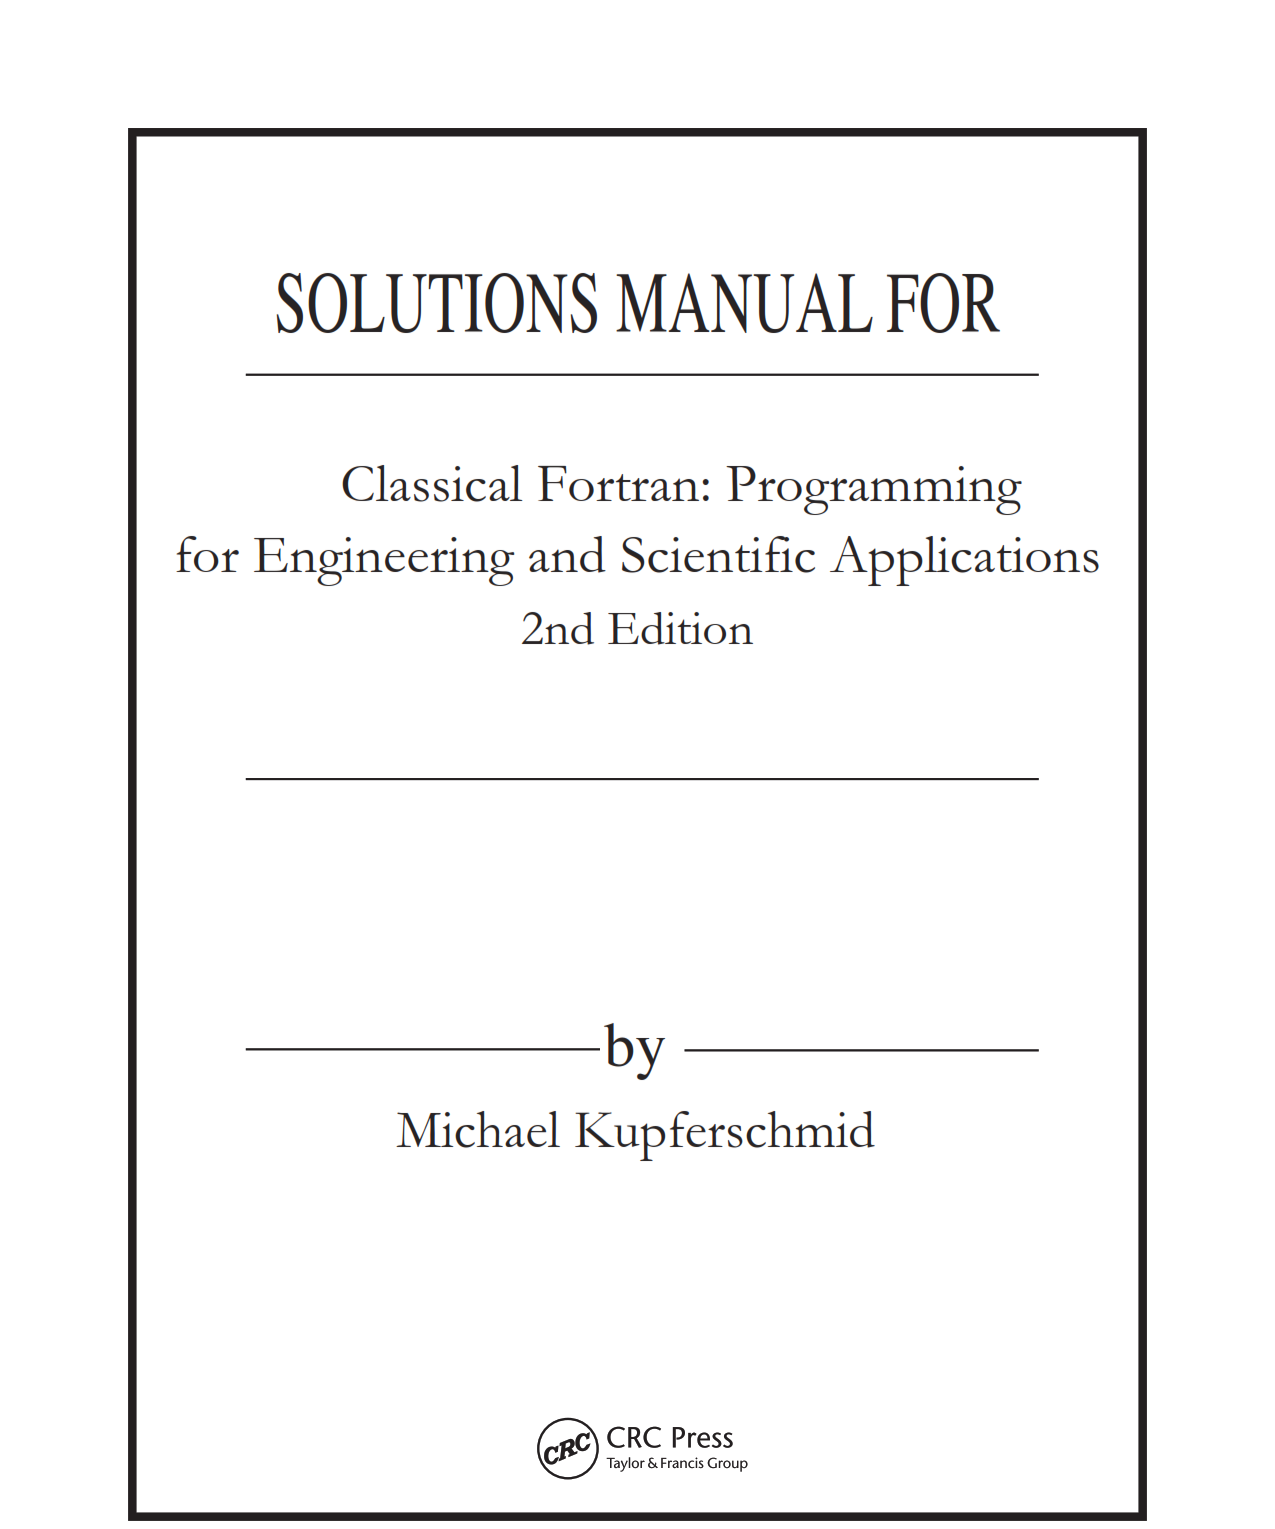 download free Classical Fortran Programming for Engineering and Scientific Applications 2nd edition Solution Manual and eBook pdf